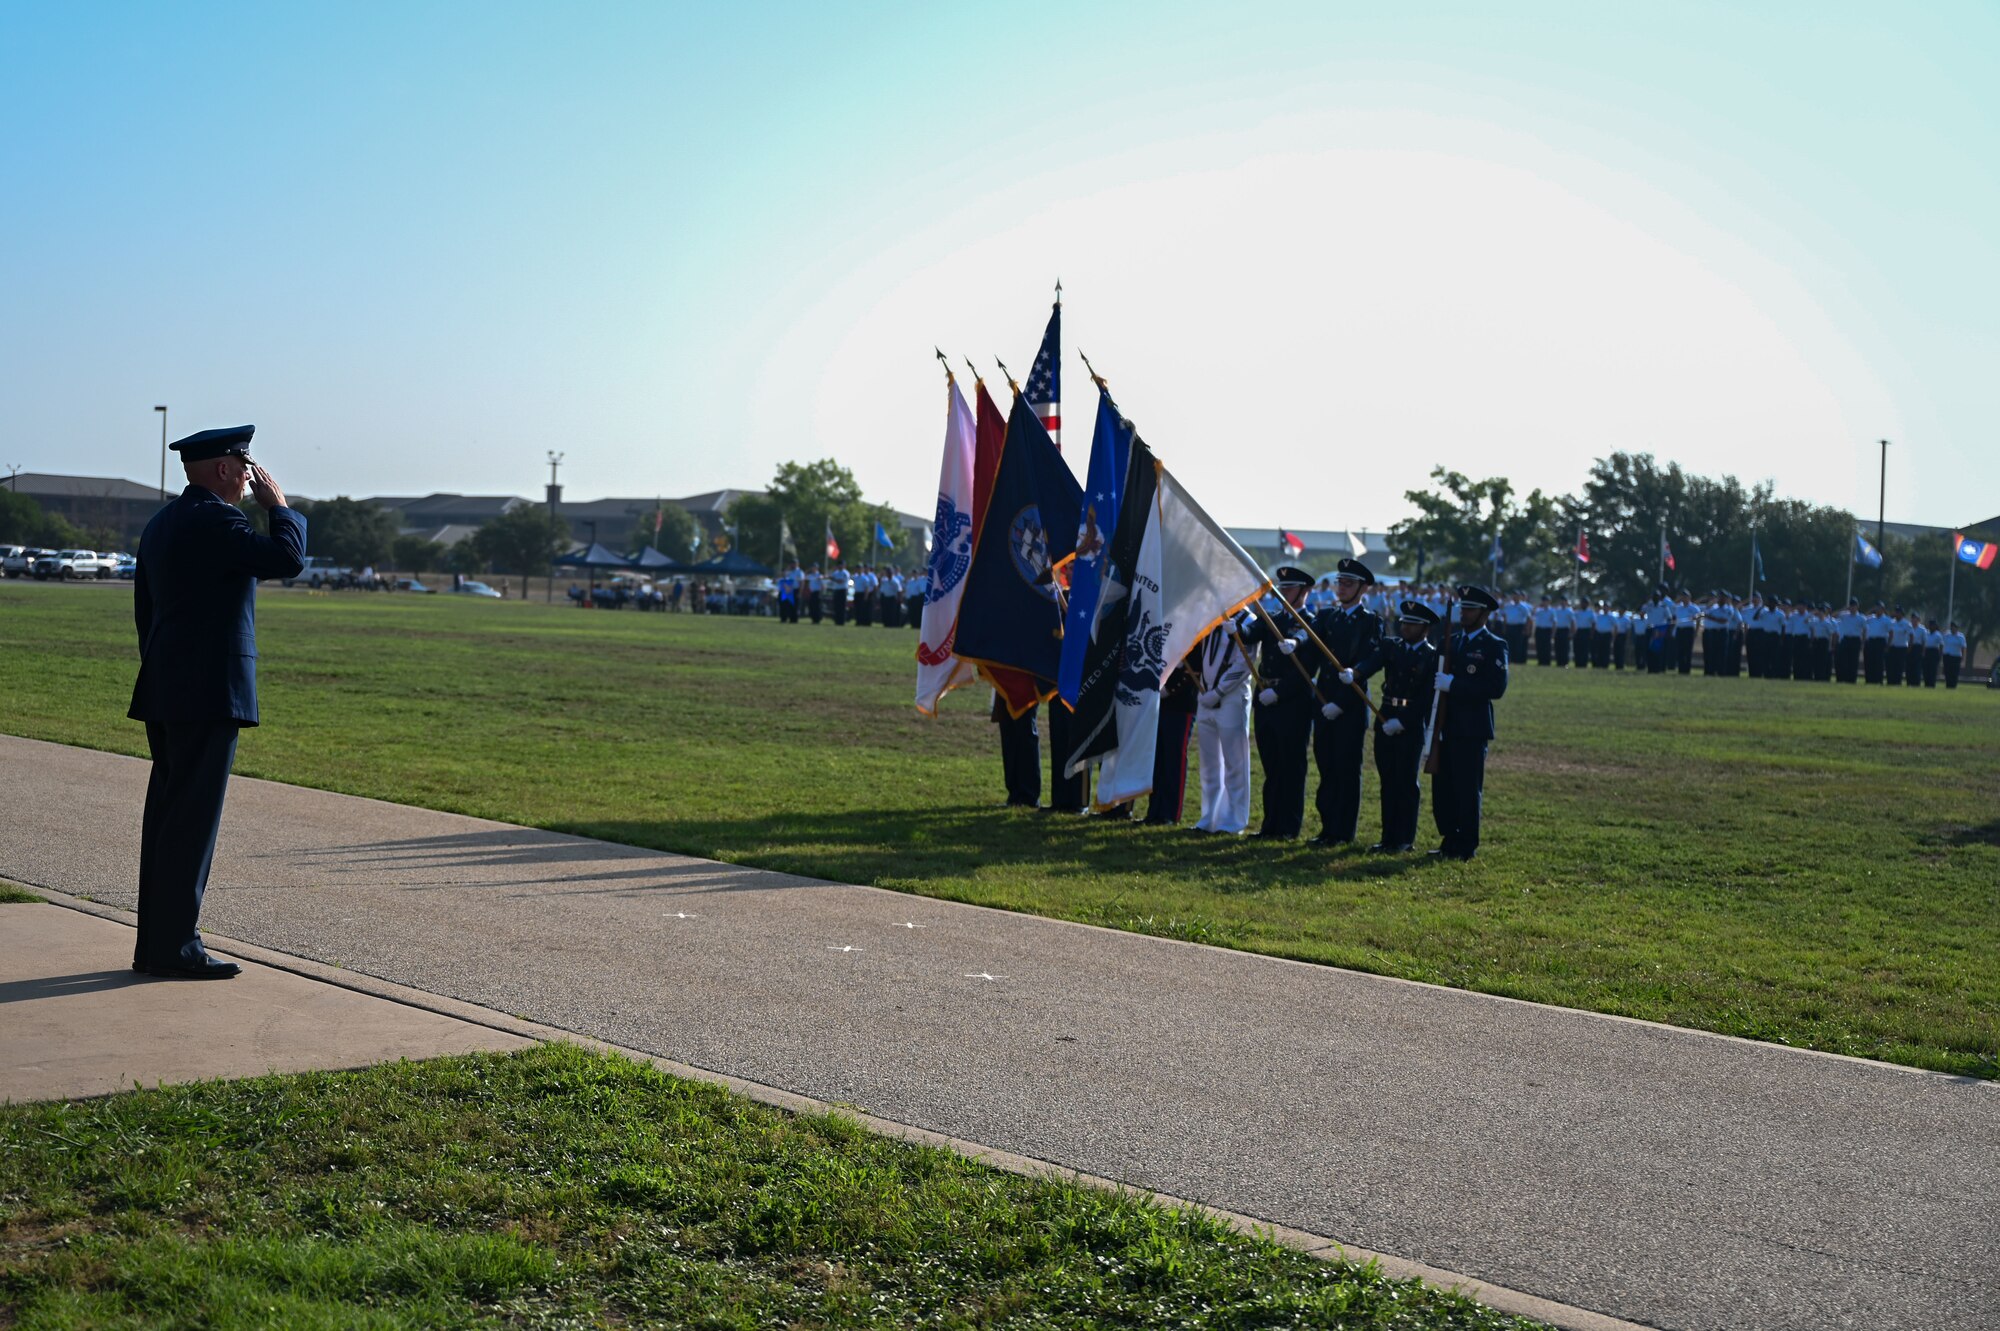 Members of the 17th Training Wing present a final salute to U.S. Air Force Col. Matthew Reilman, outgoing 17th TRW commander, during the change of command ceremony at Goodfellow Air Force Base, Texas, June 16, 2023. The final salute represents a “thank you” to the outgoing commander for their leadership. (U.S. Air Force photo by Senior Airman Sarah Williams)